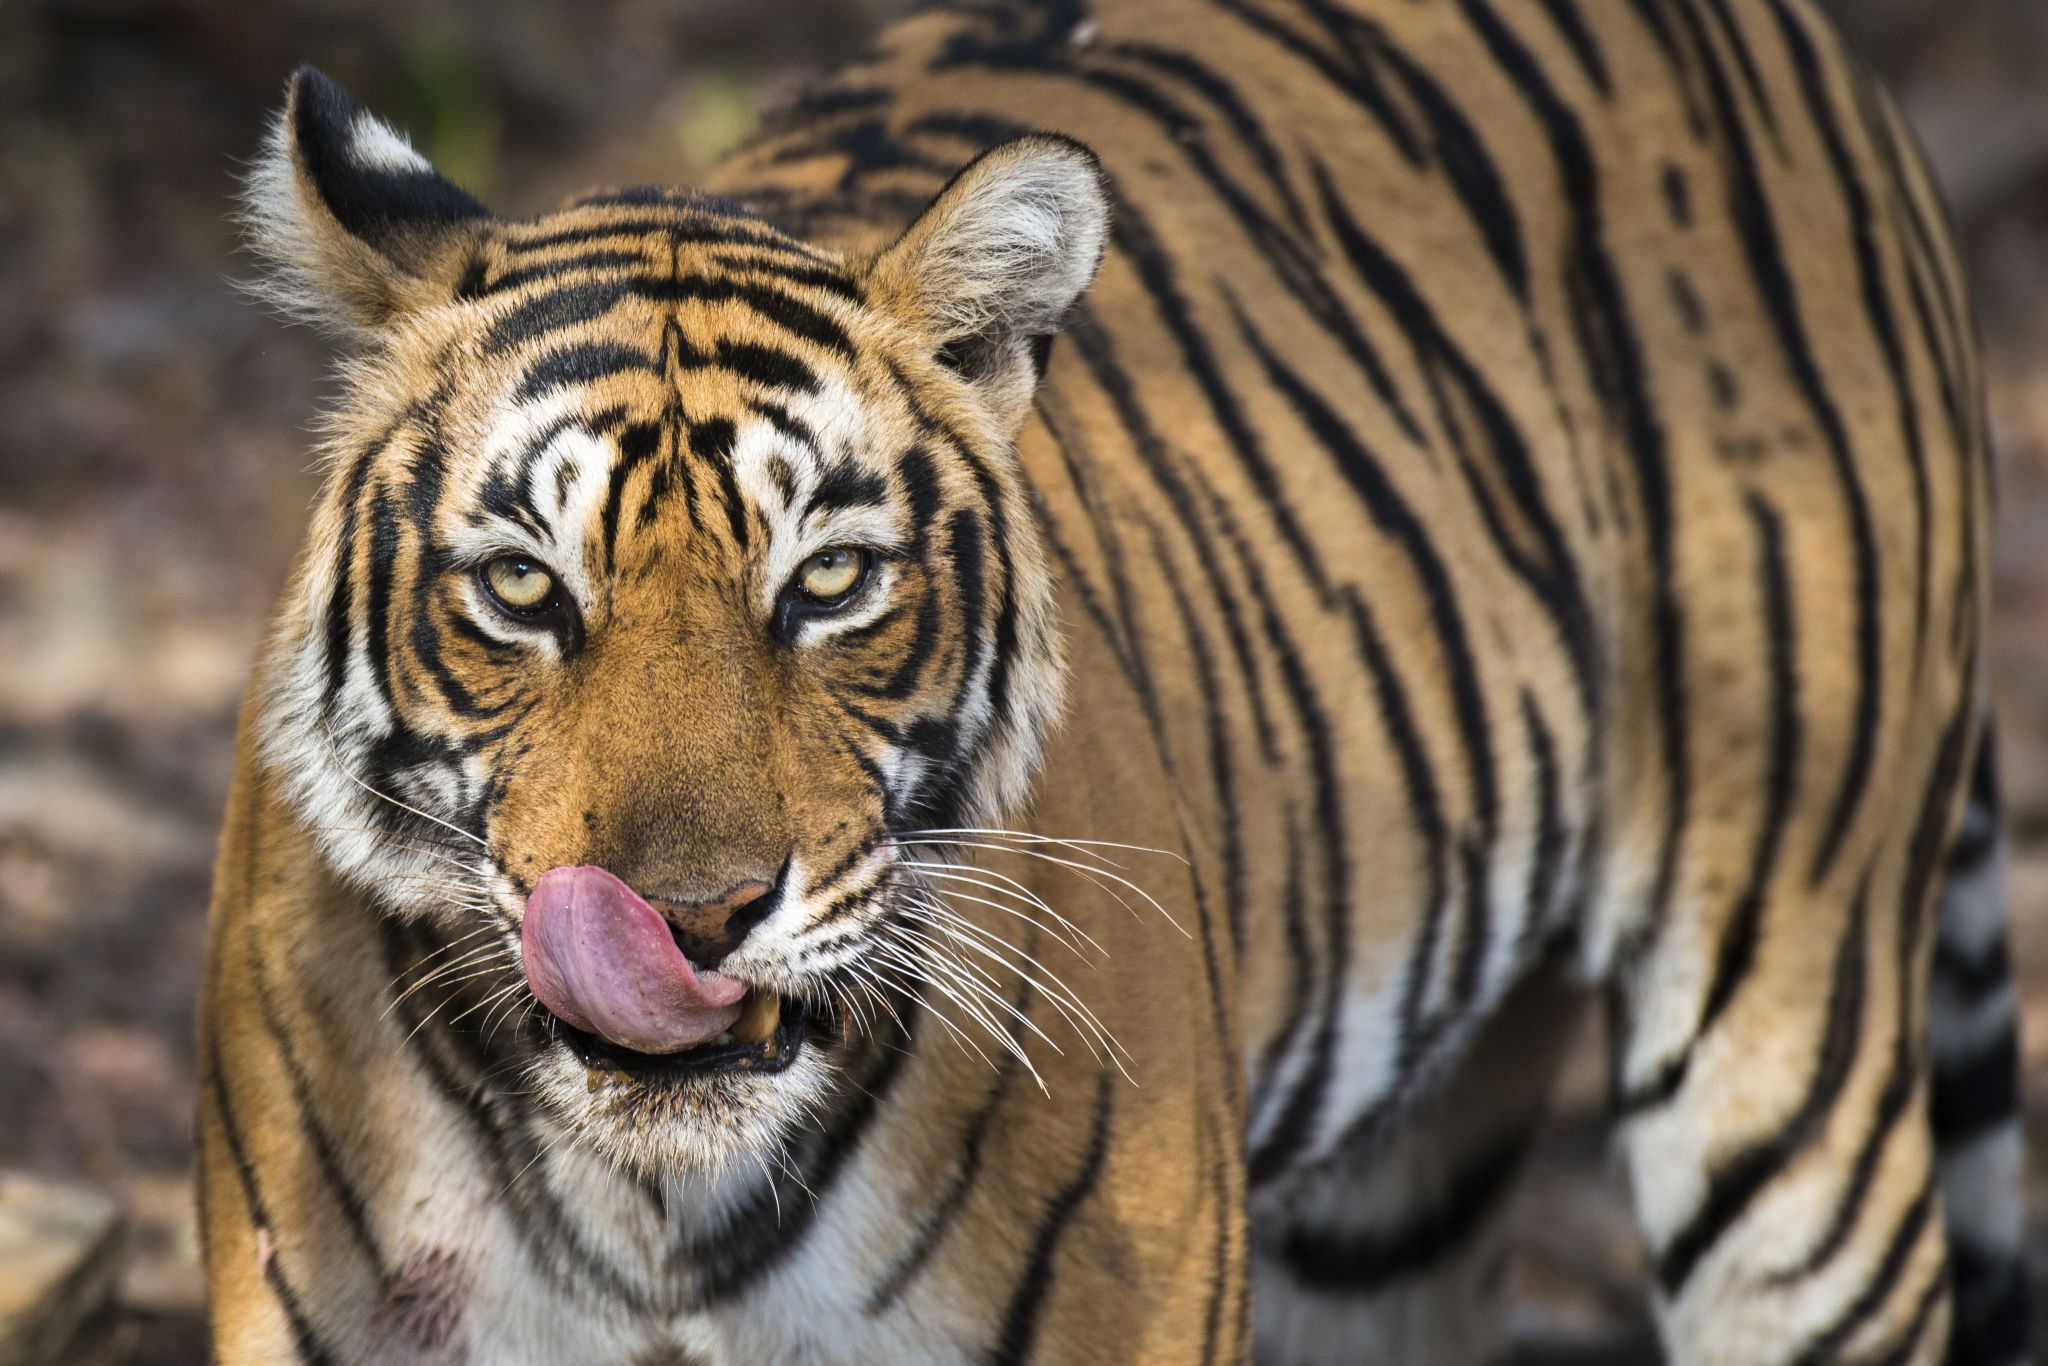 False Reports of Tiger Roaming NYC Streets Cause Panic